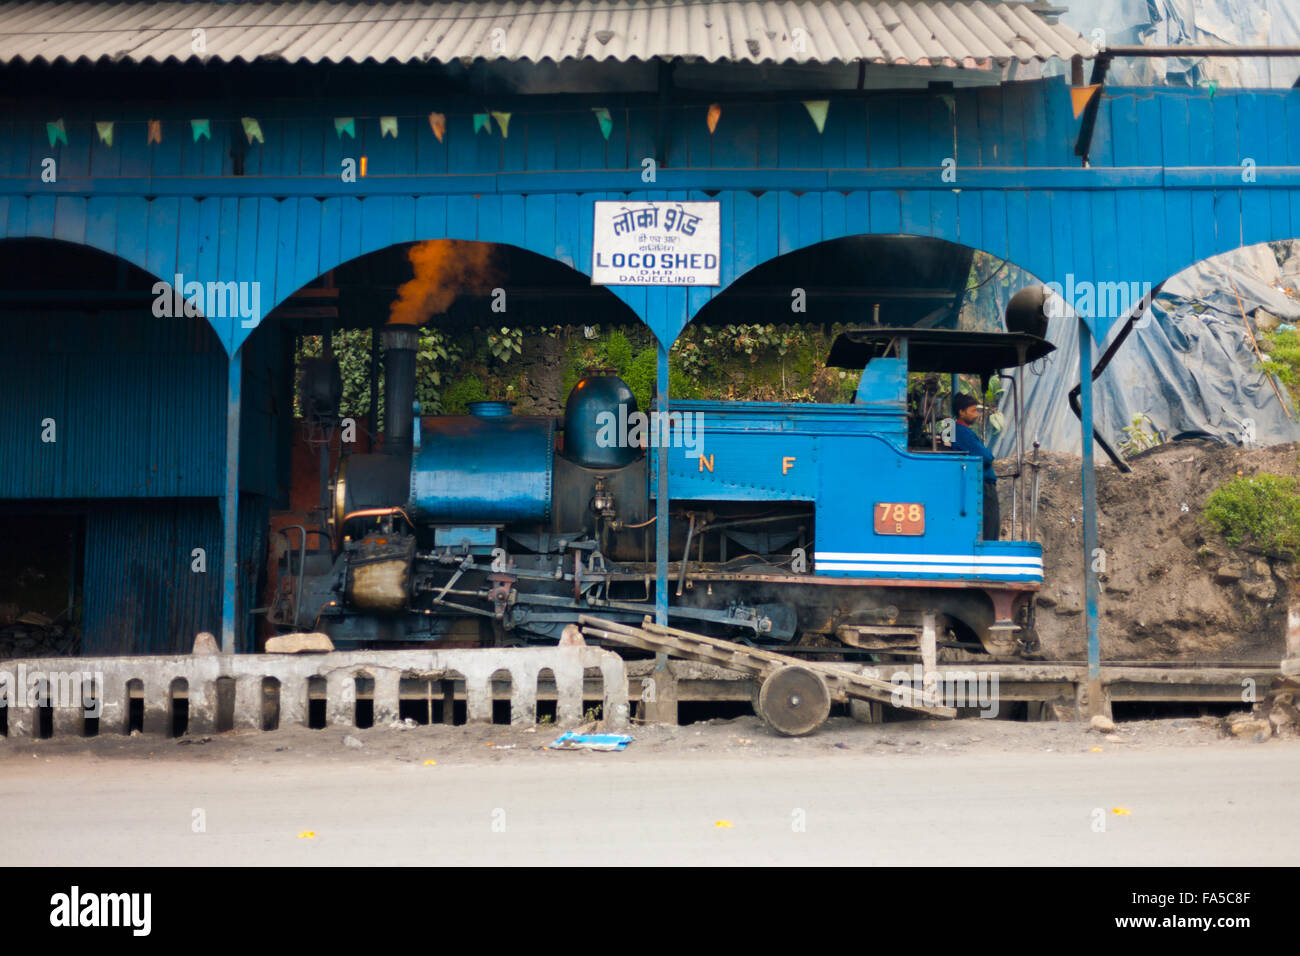 Indian driver standing inside a parked blue toy train engine in its shed Stock Photo